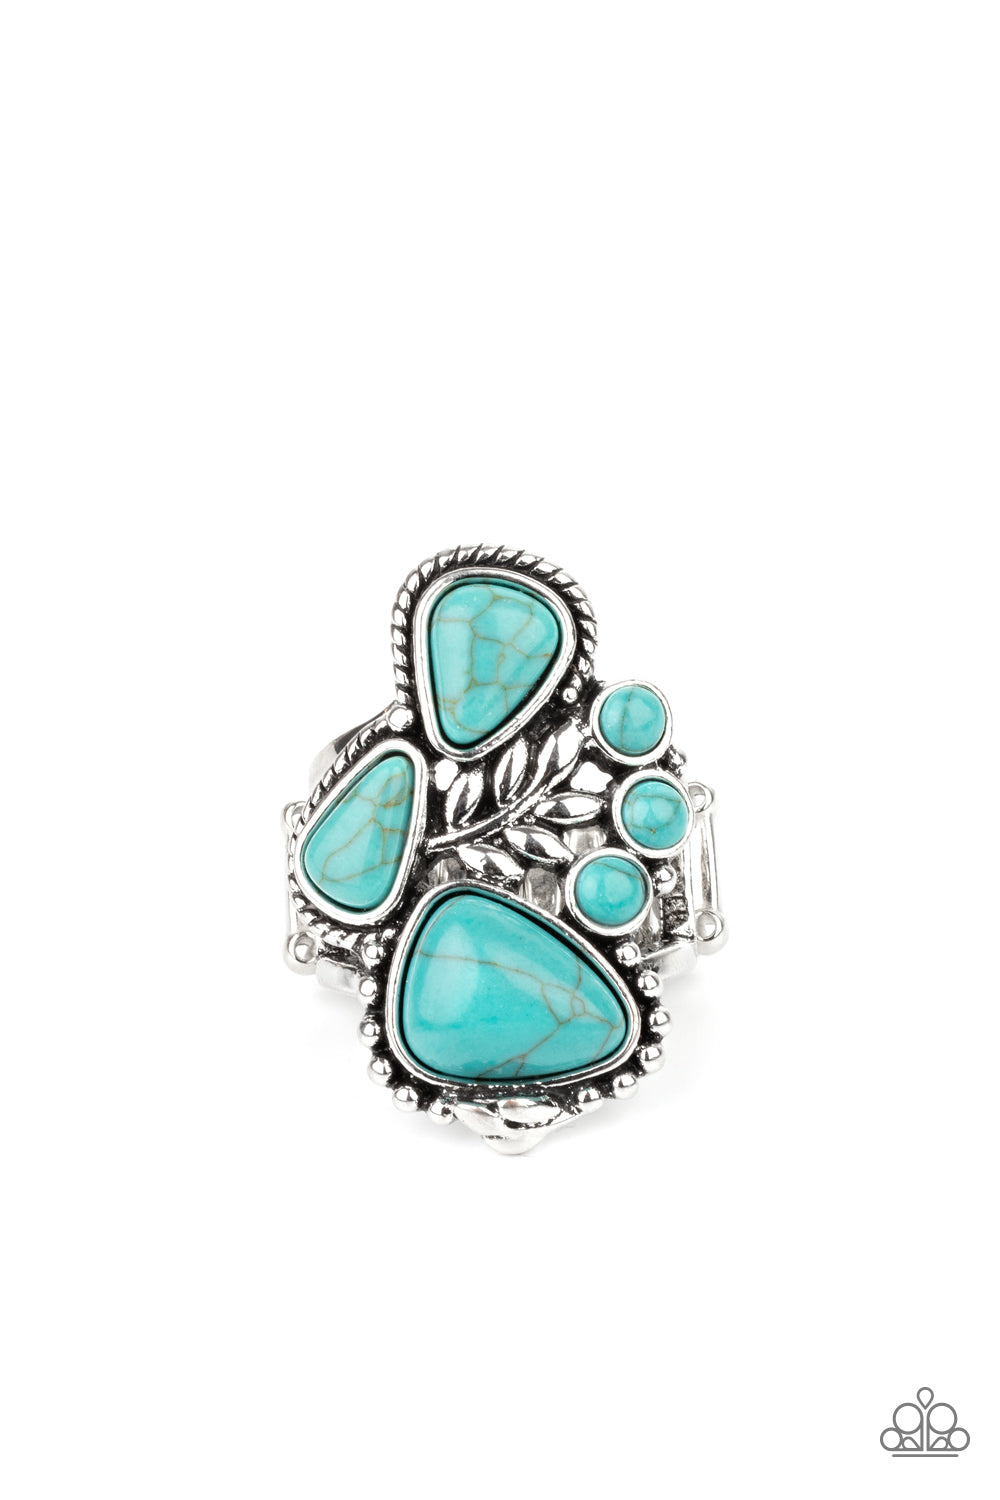 Mystical Mesa - Blue Turquoise and Silver Ring - Paparazzi Accessories - Featuring round and teardrop shapes, a refreshing collection of turquoise stones gather around a leafy silver accent, creating a whimsical center atop the finger. Features a stretchy band for a flexible fit. Sold as one individual fashion ring.